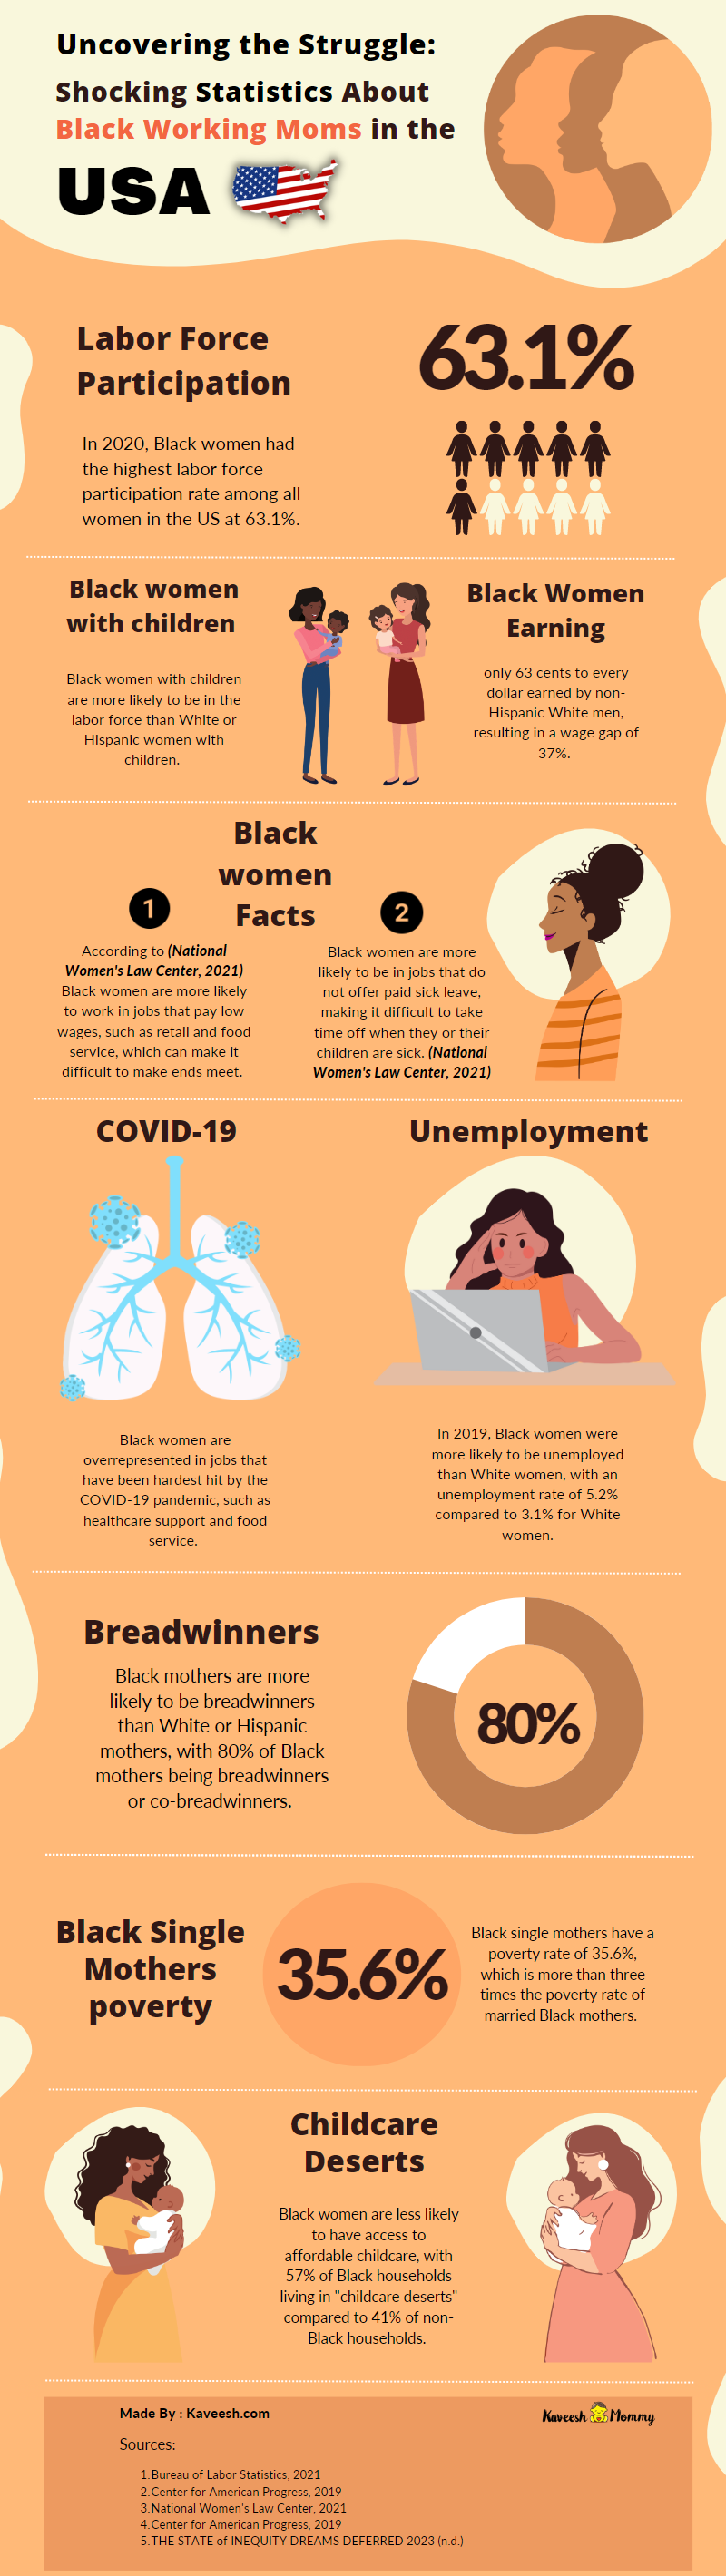 Infographic showcasing 10 statistics on the challenges faced by Black working moms in the (USA) United States, including balancing work and family responsibilities, systemic racial inequalities, and discrimination.